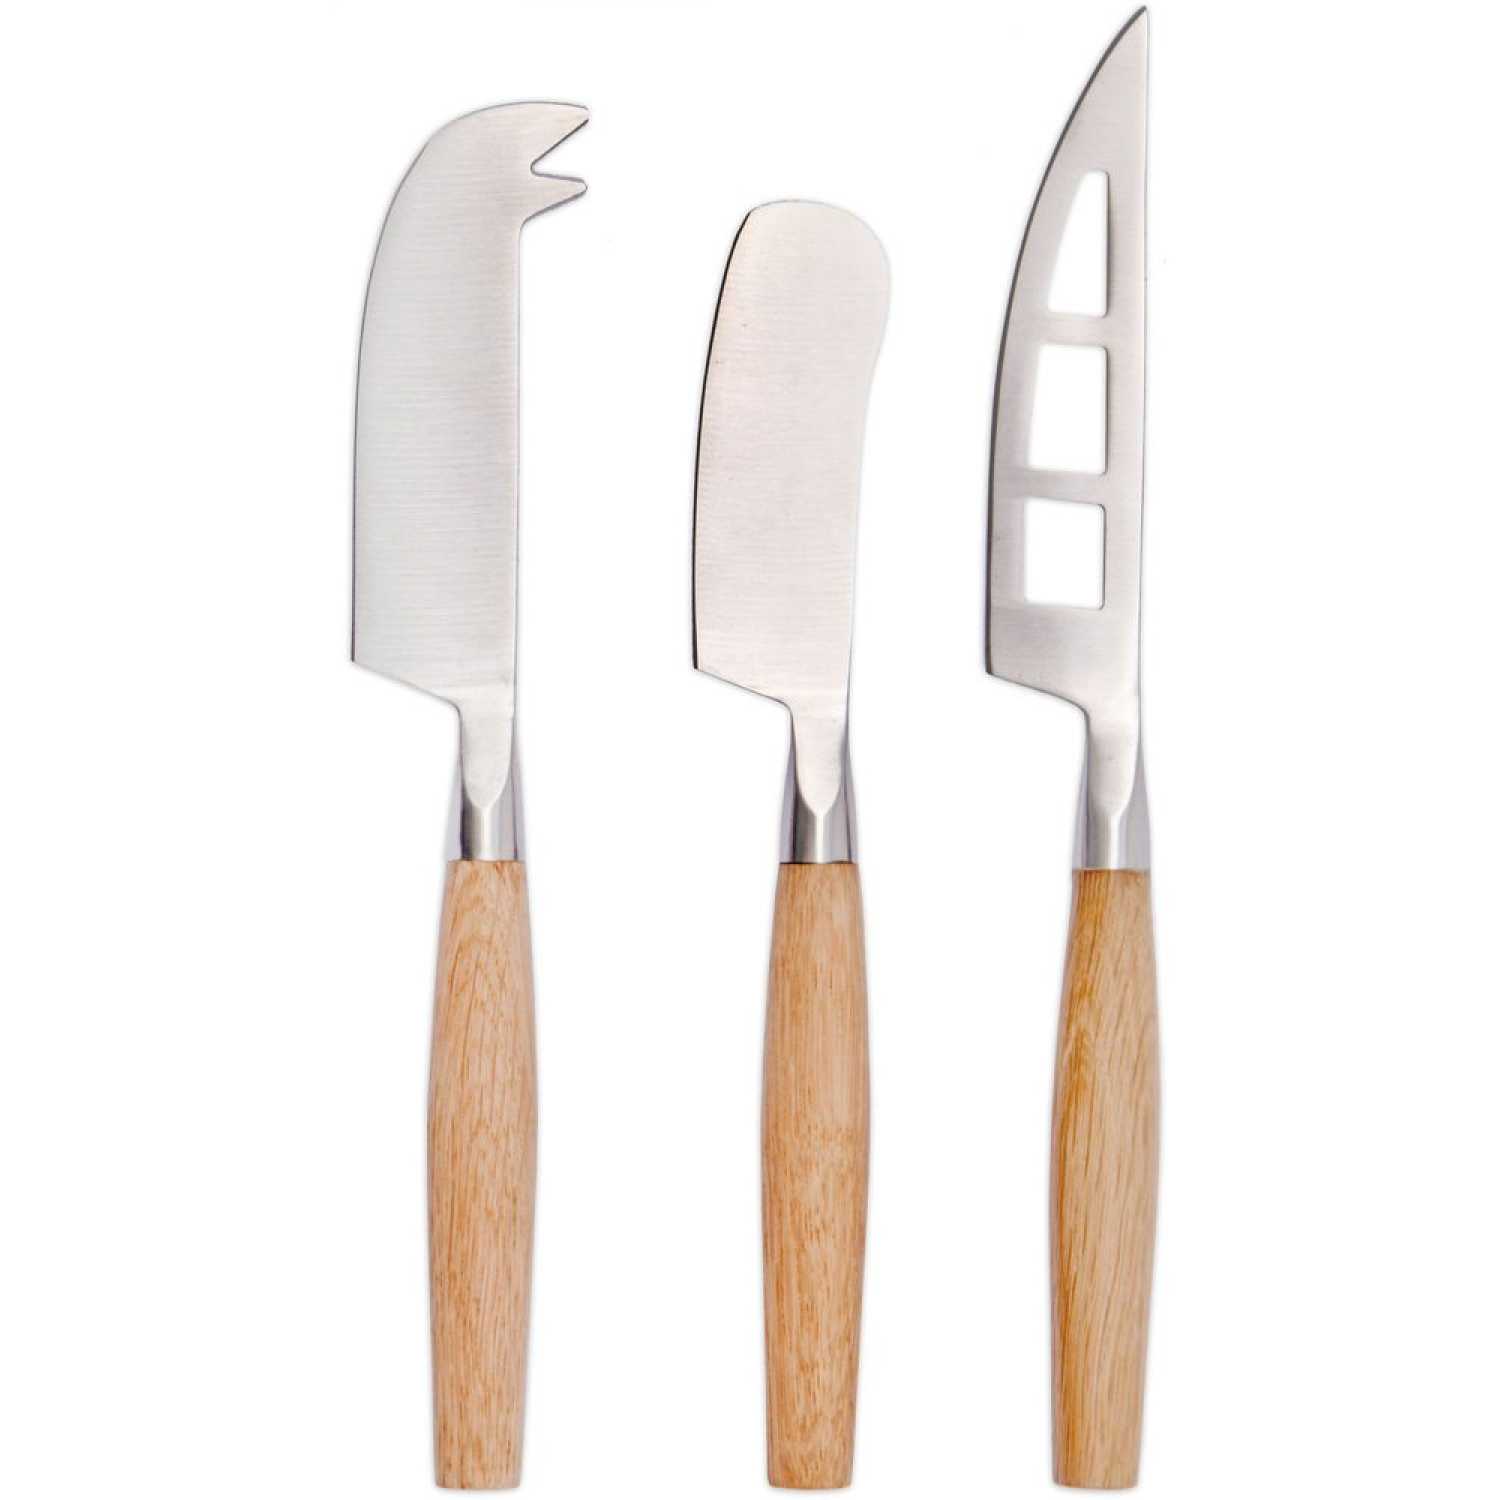 Garden Trading Kitchen Cheese Knives - Set of 3